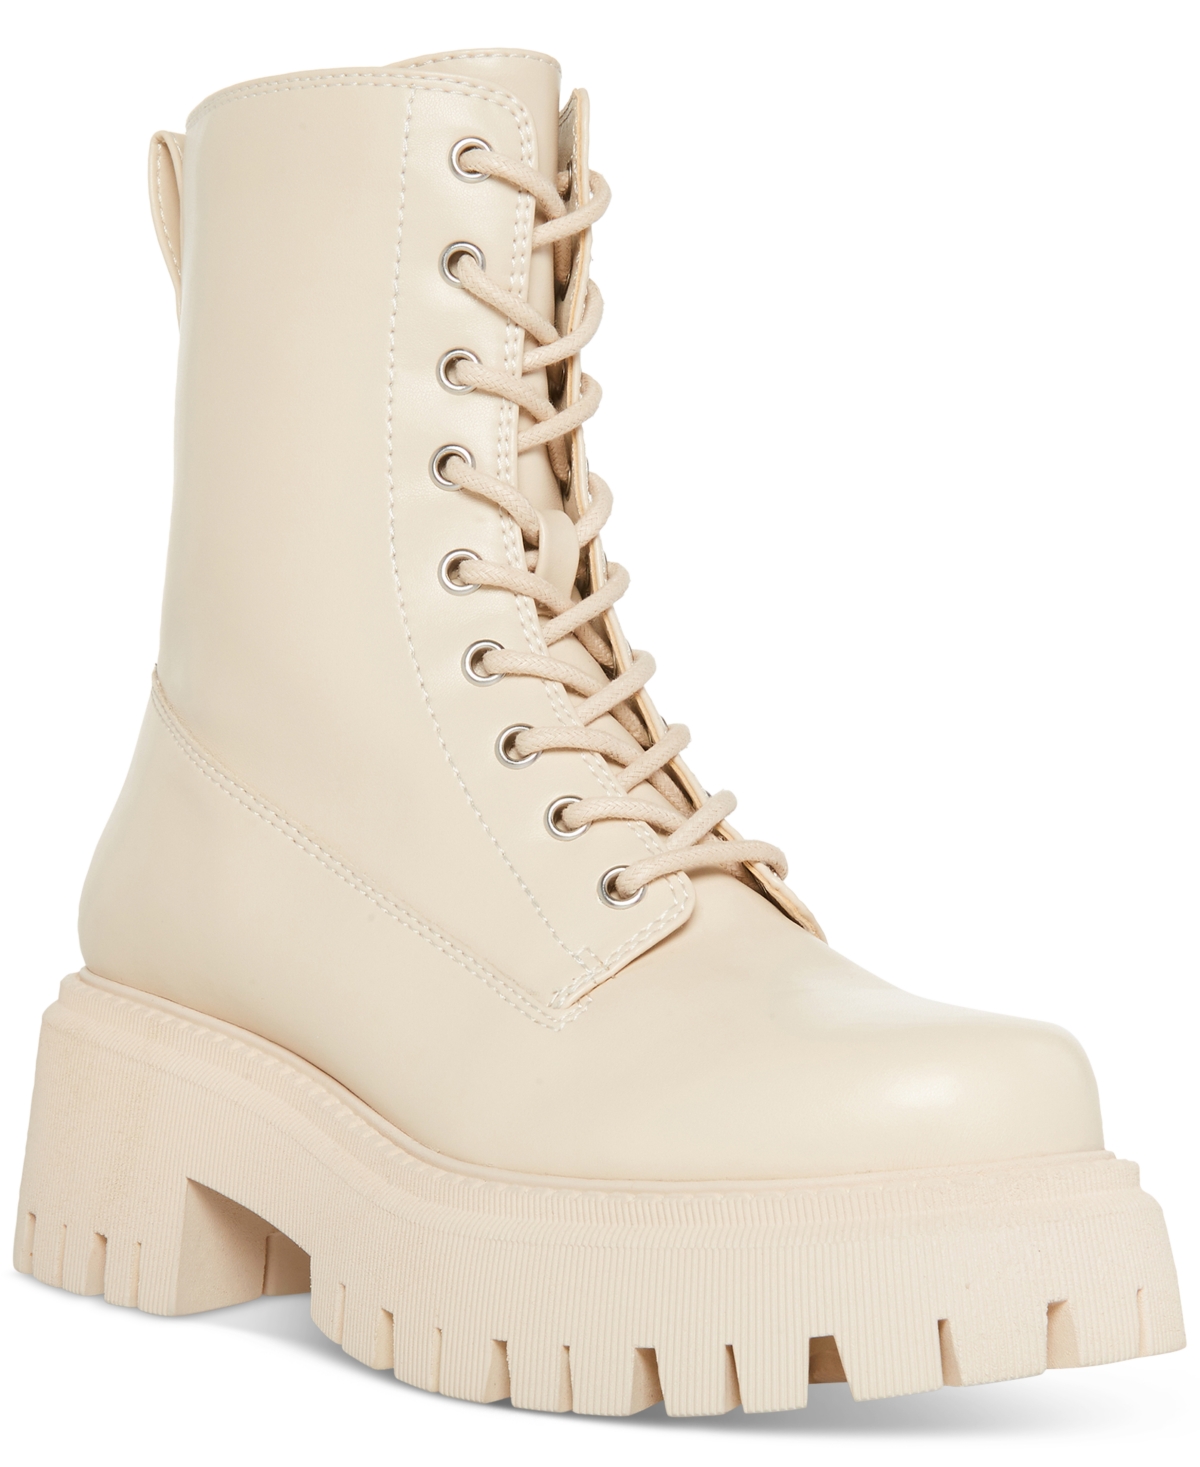 Kknight Lace-Up Lug Sole Combat Booties - Almond